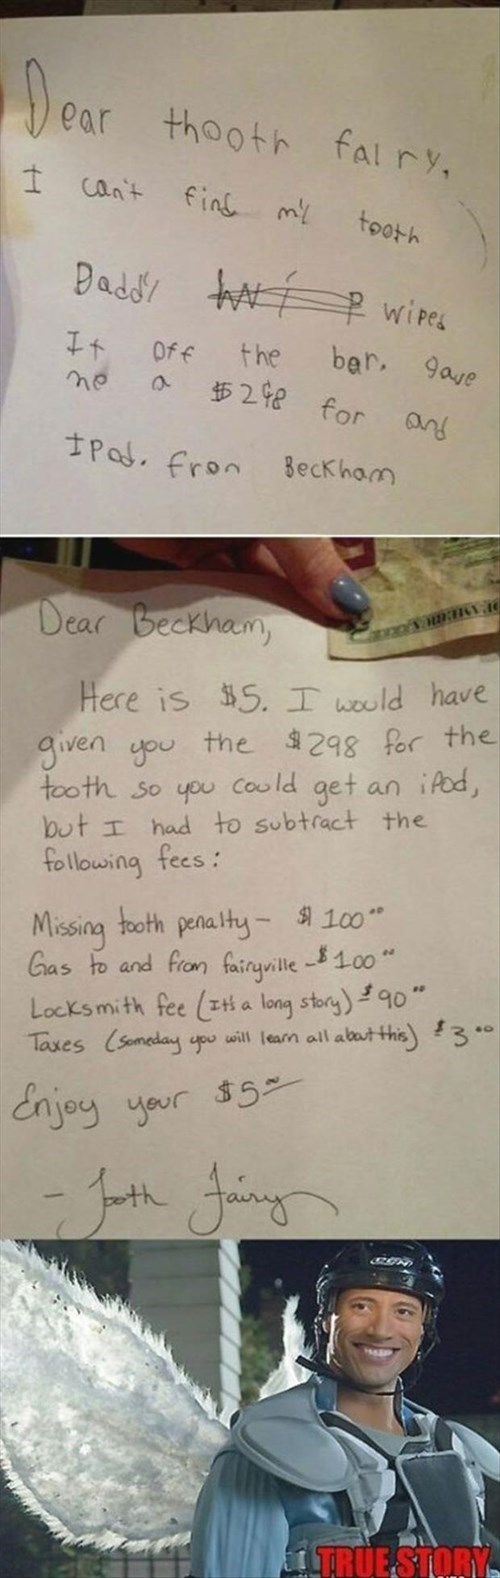 tooth fairy,kids,letters,parenting,g rated